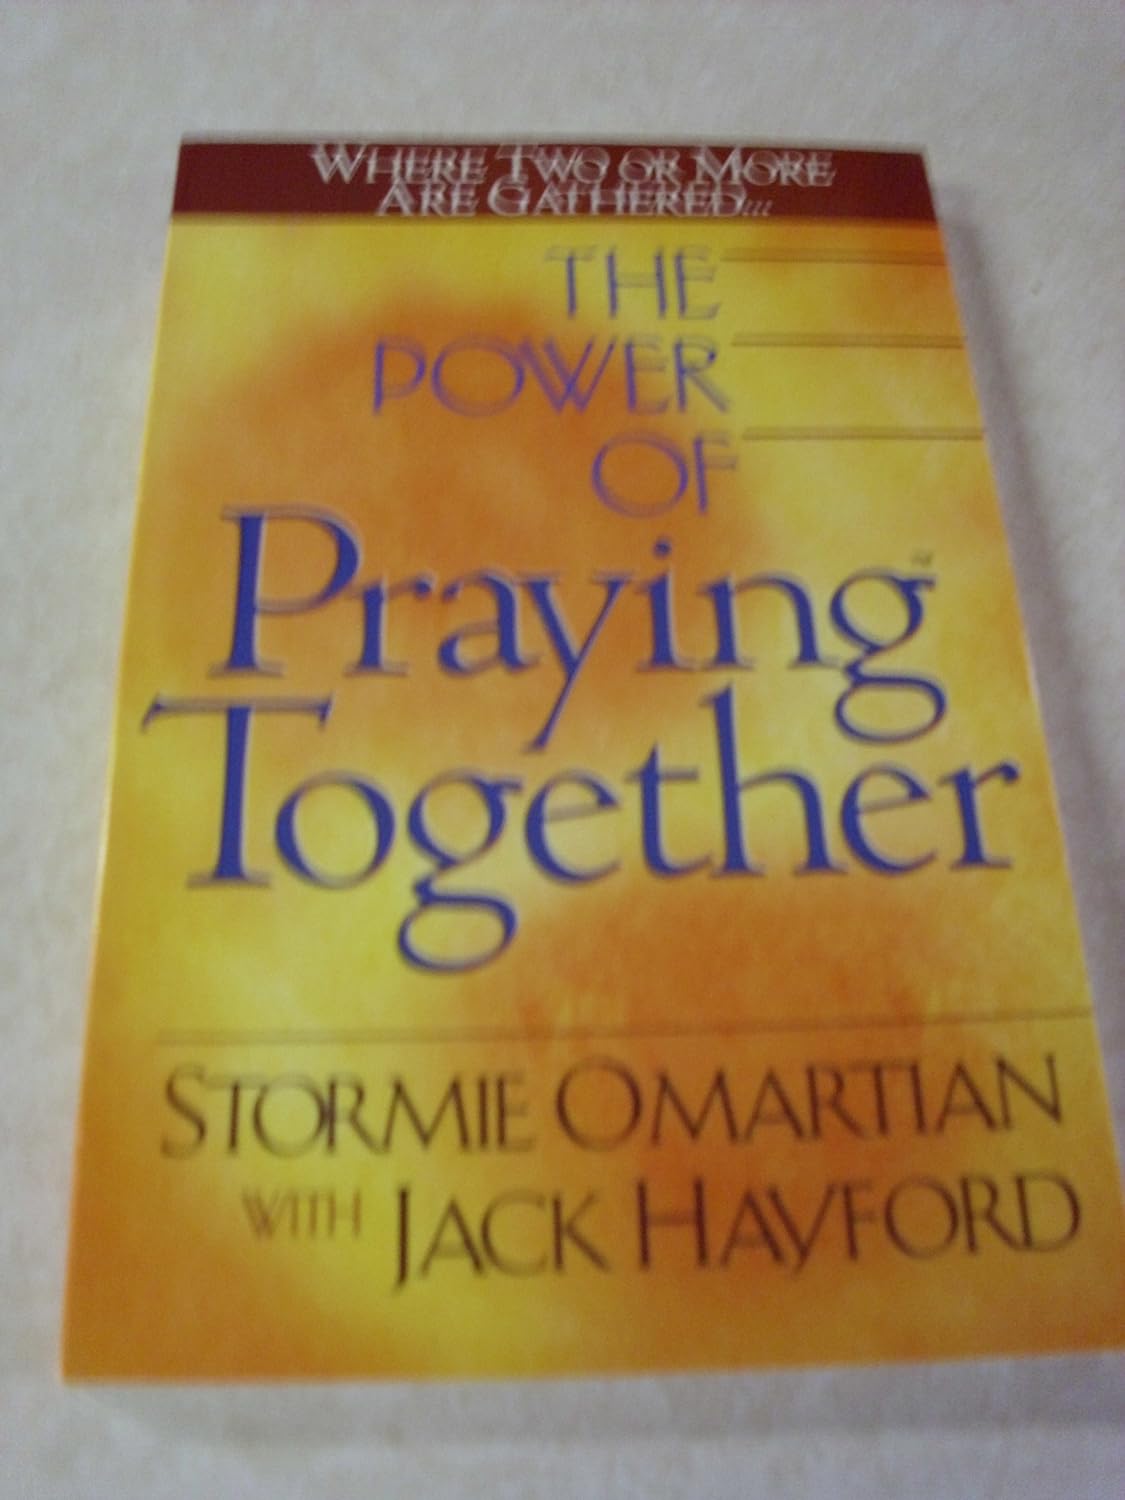 The Power of Praying® Together: Where Two or More Are Gathered